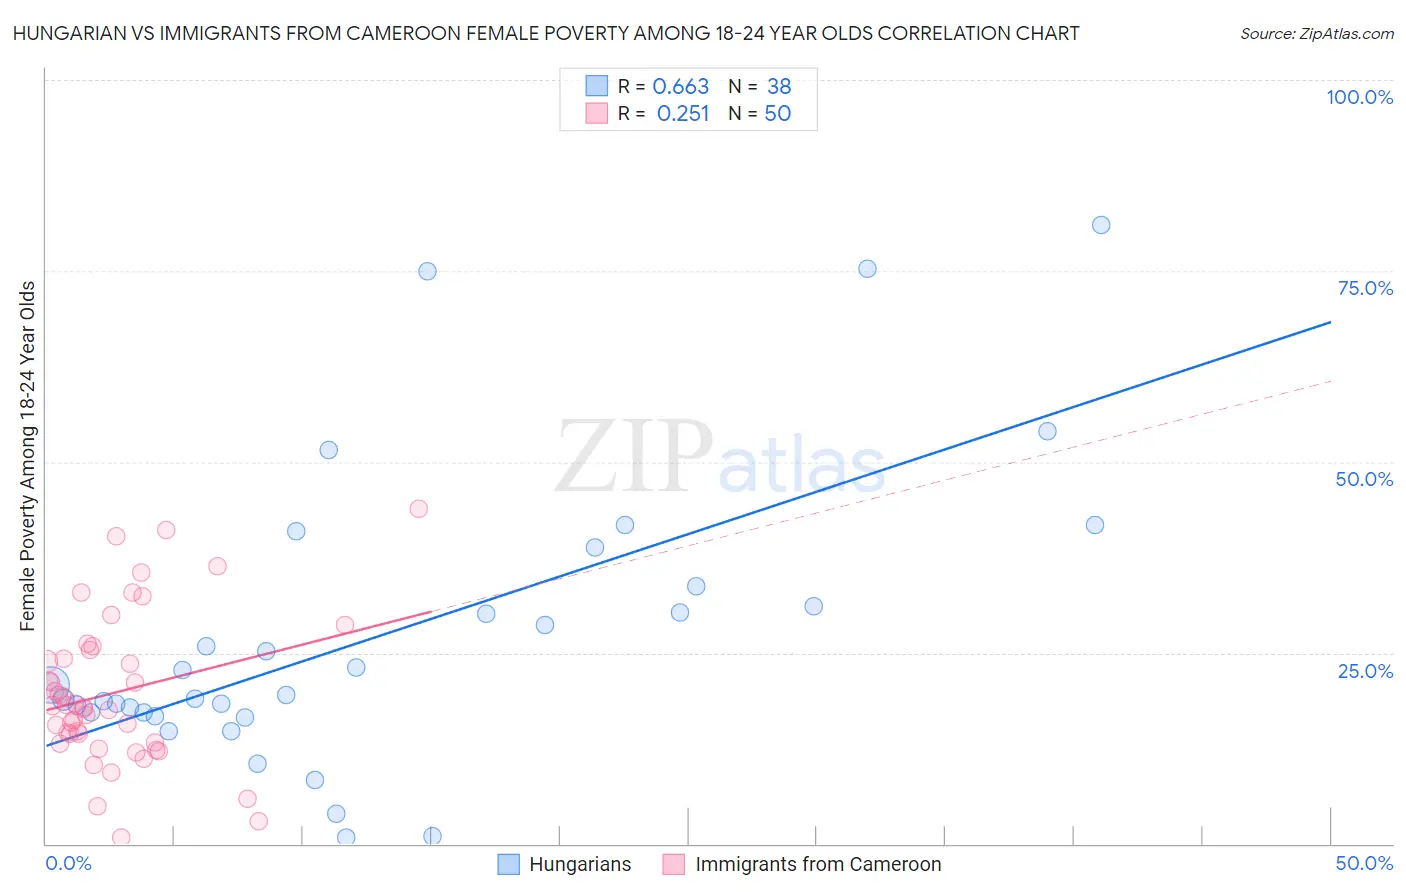 Hungarian vs Immigrants from Cameroon Female Poverty Among 18-24 Year Olds